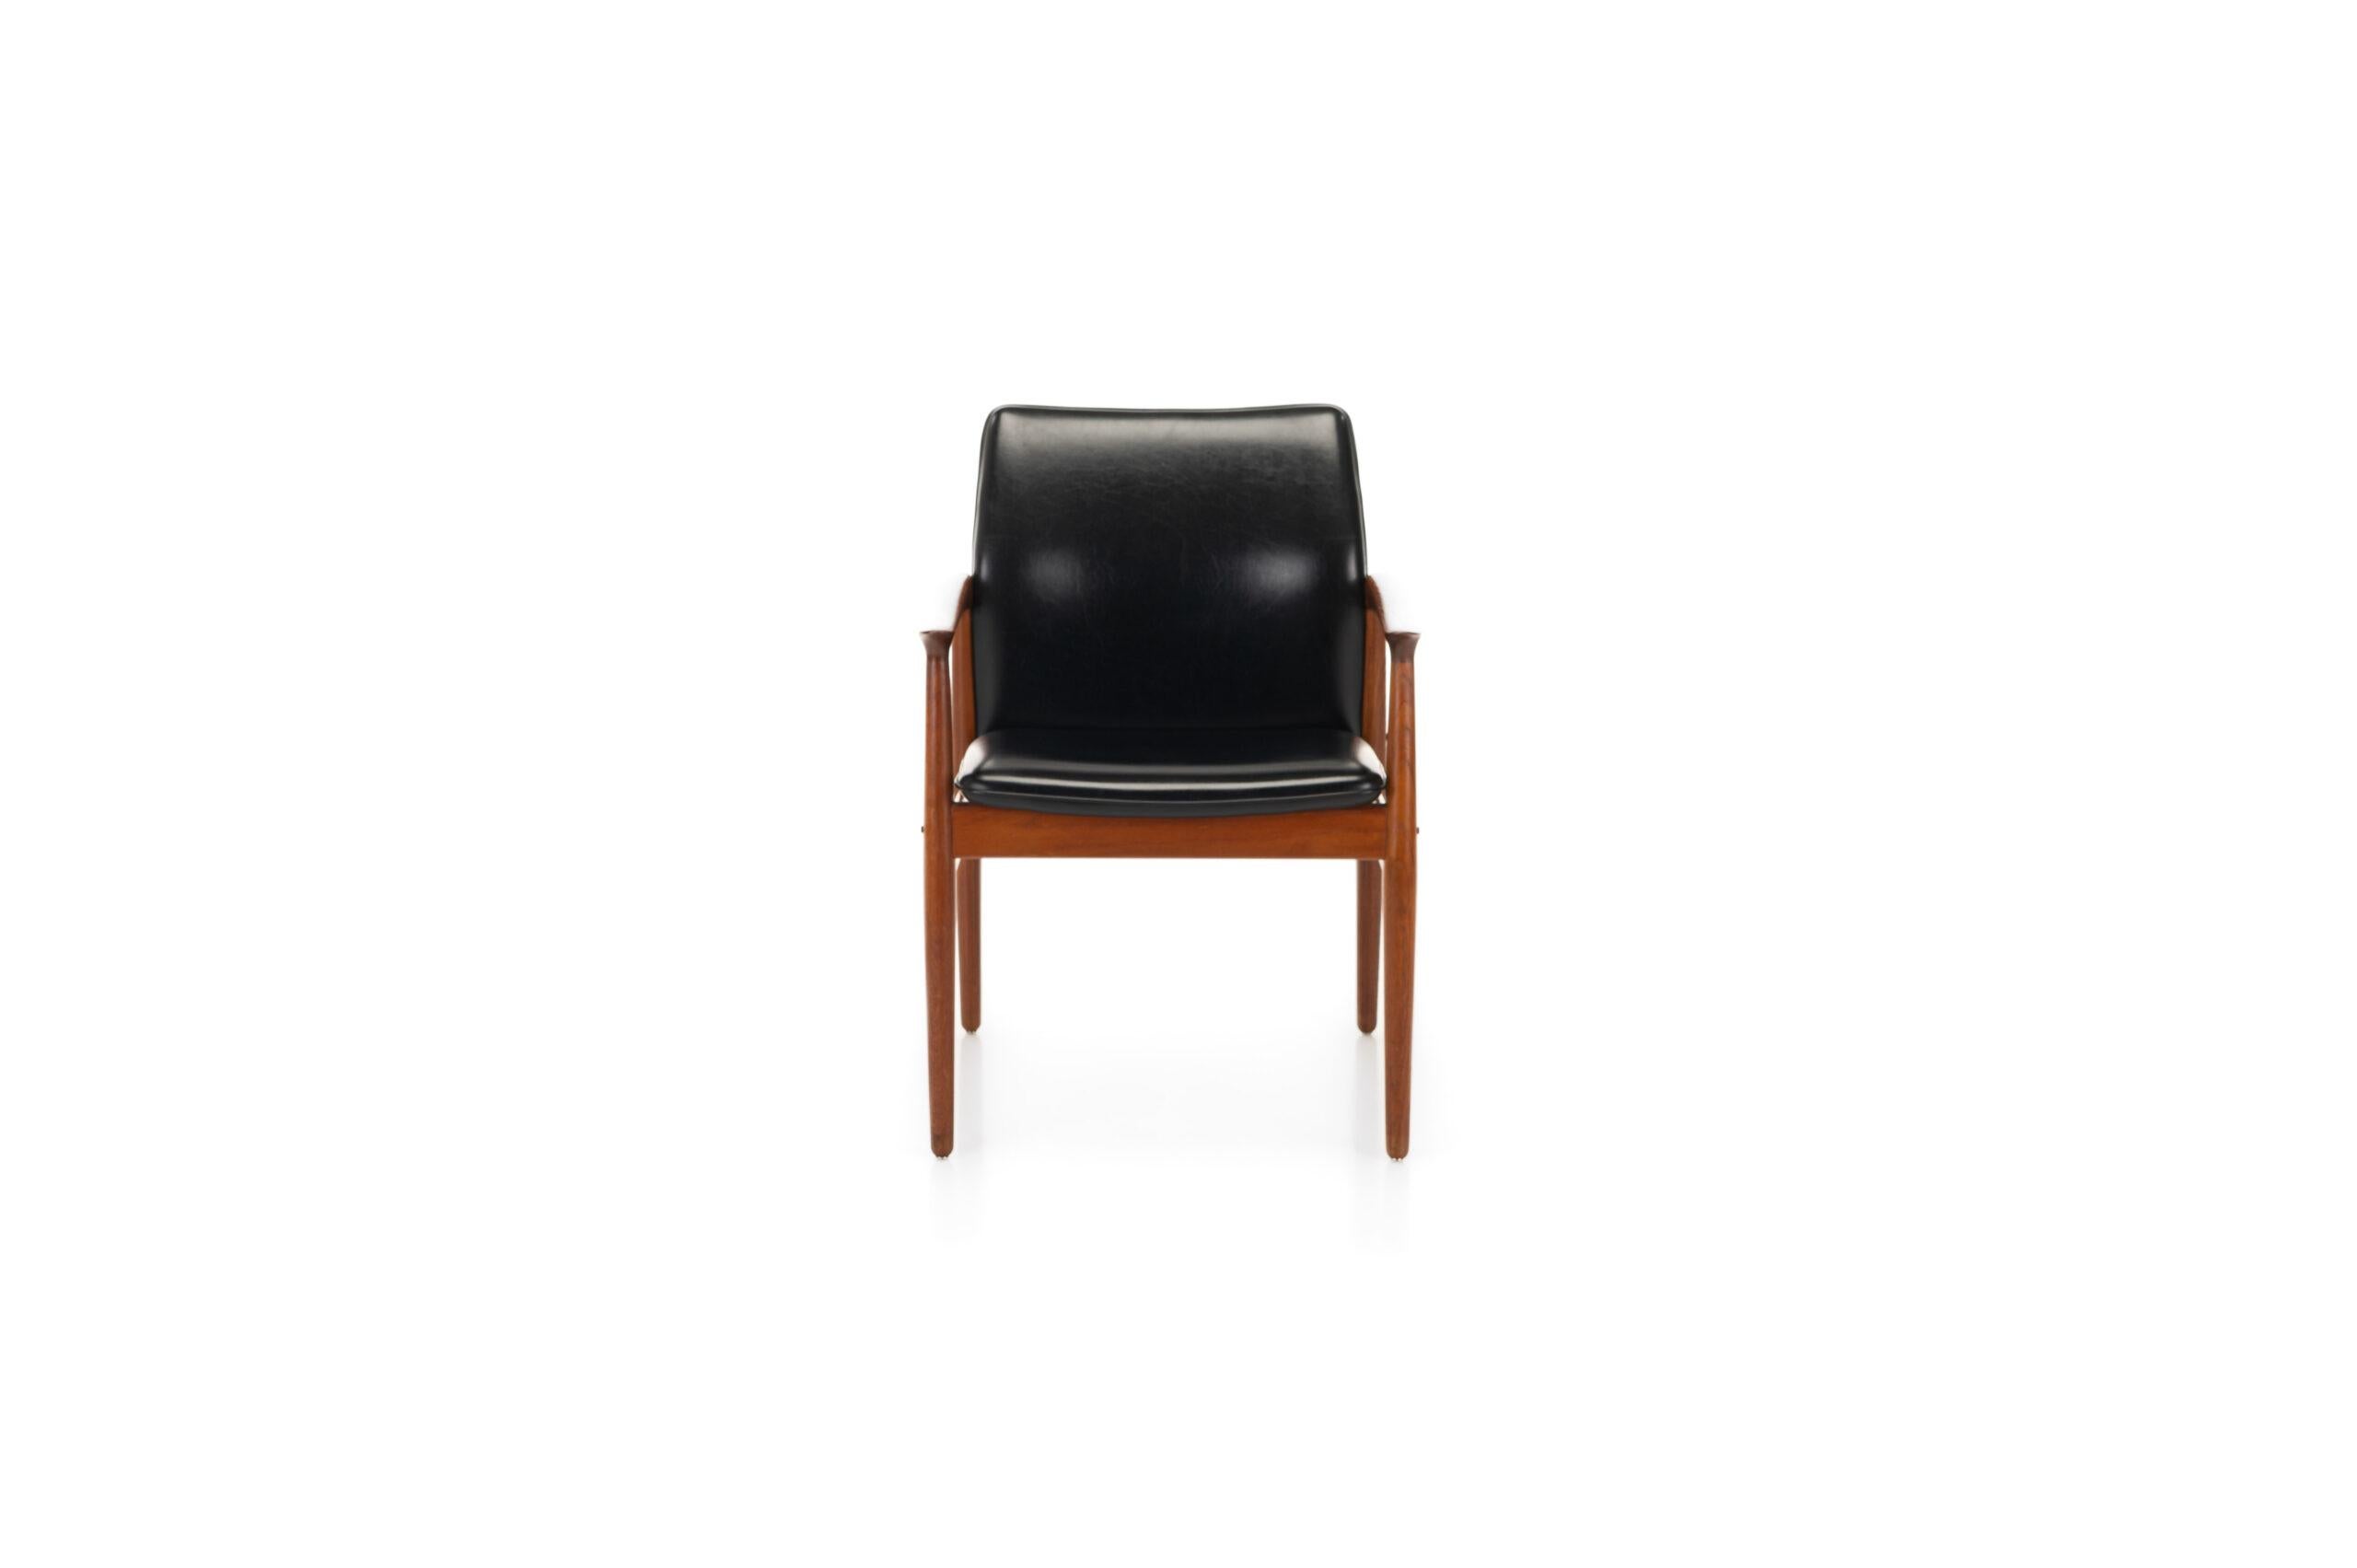 Danish armchair by Grete Jalk for Glostrup, Denmark 1960s. The chair has a teak frame, a black skai upholstery and is in great original condition.